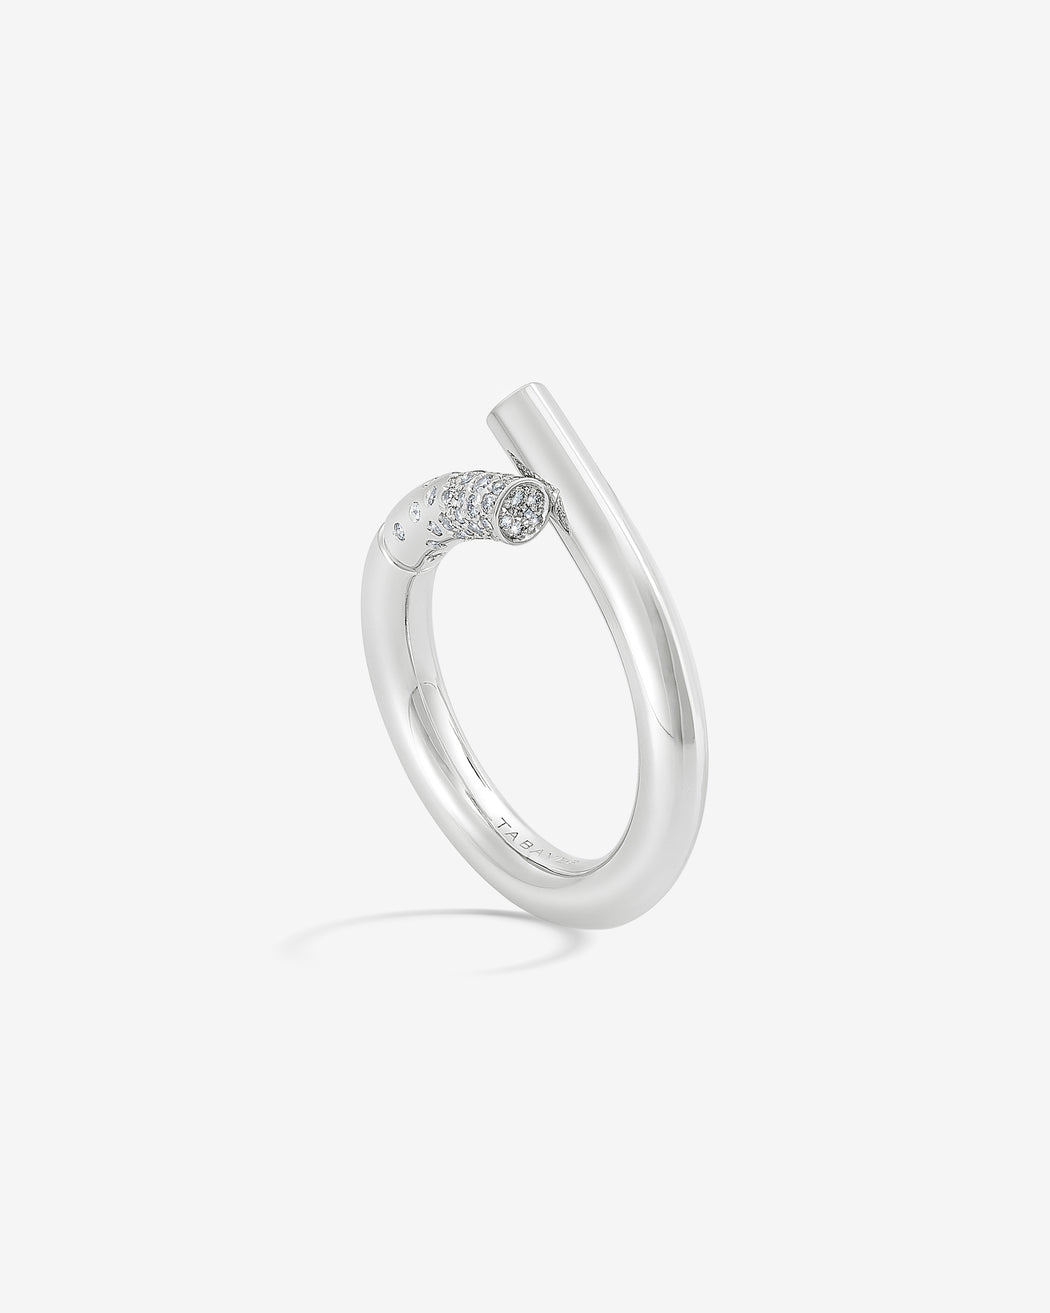 Oera ring 18k Fairmined white gold and diamonds, Tabayer ethical fine jewelry 